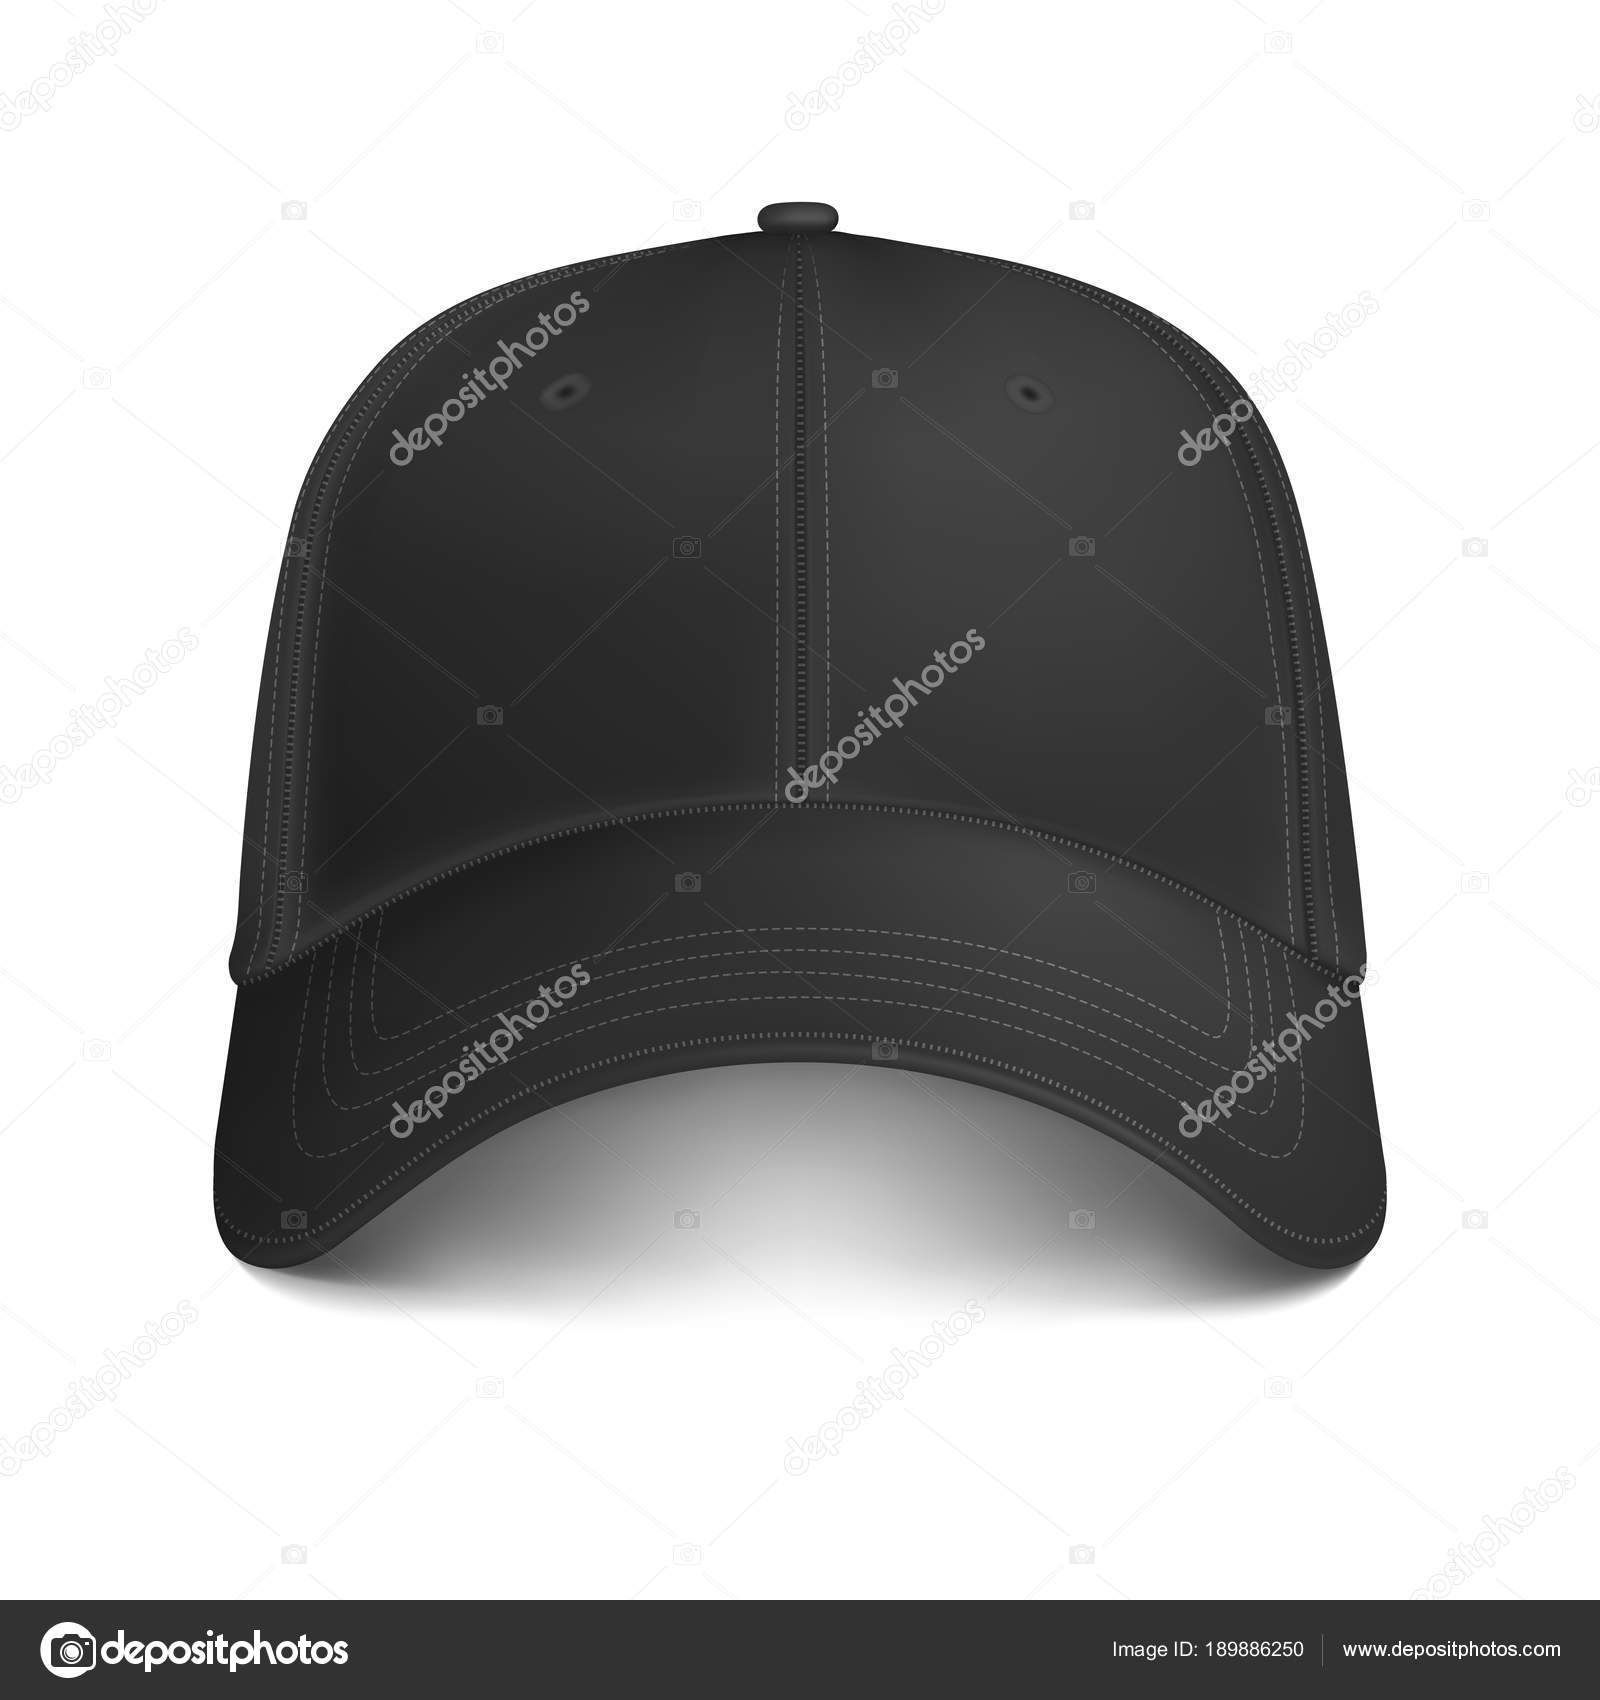 Download 38+ Trucker Cap With Flat Visor Mockup Side View PNG ...